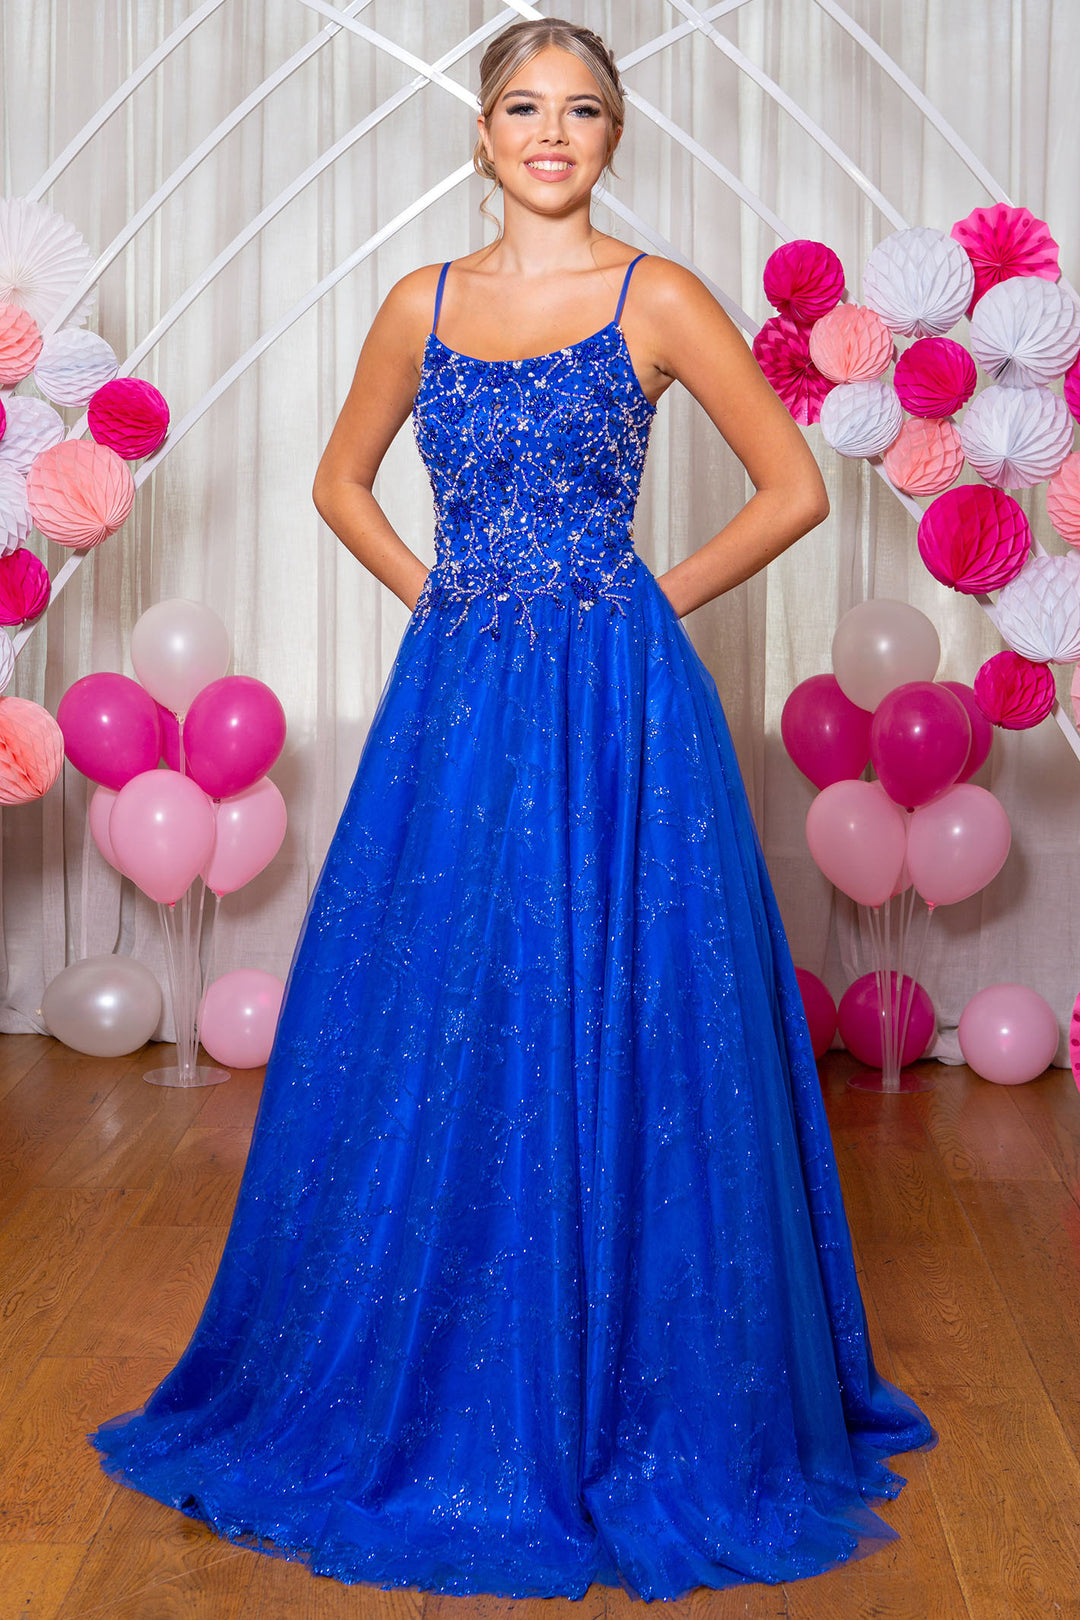 Prom Frocks PF9921 Royal Blue Glitter Tulle Prom Dress - Dotique Chesterfield